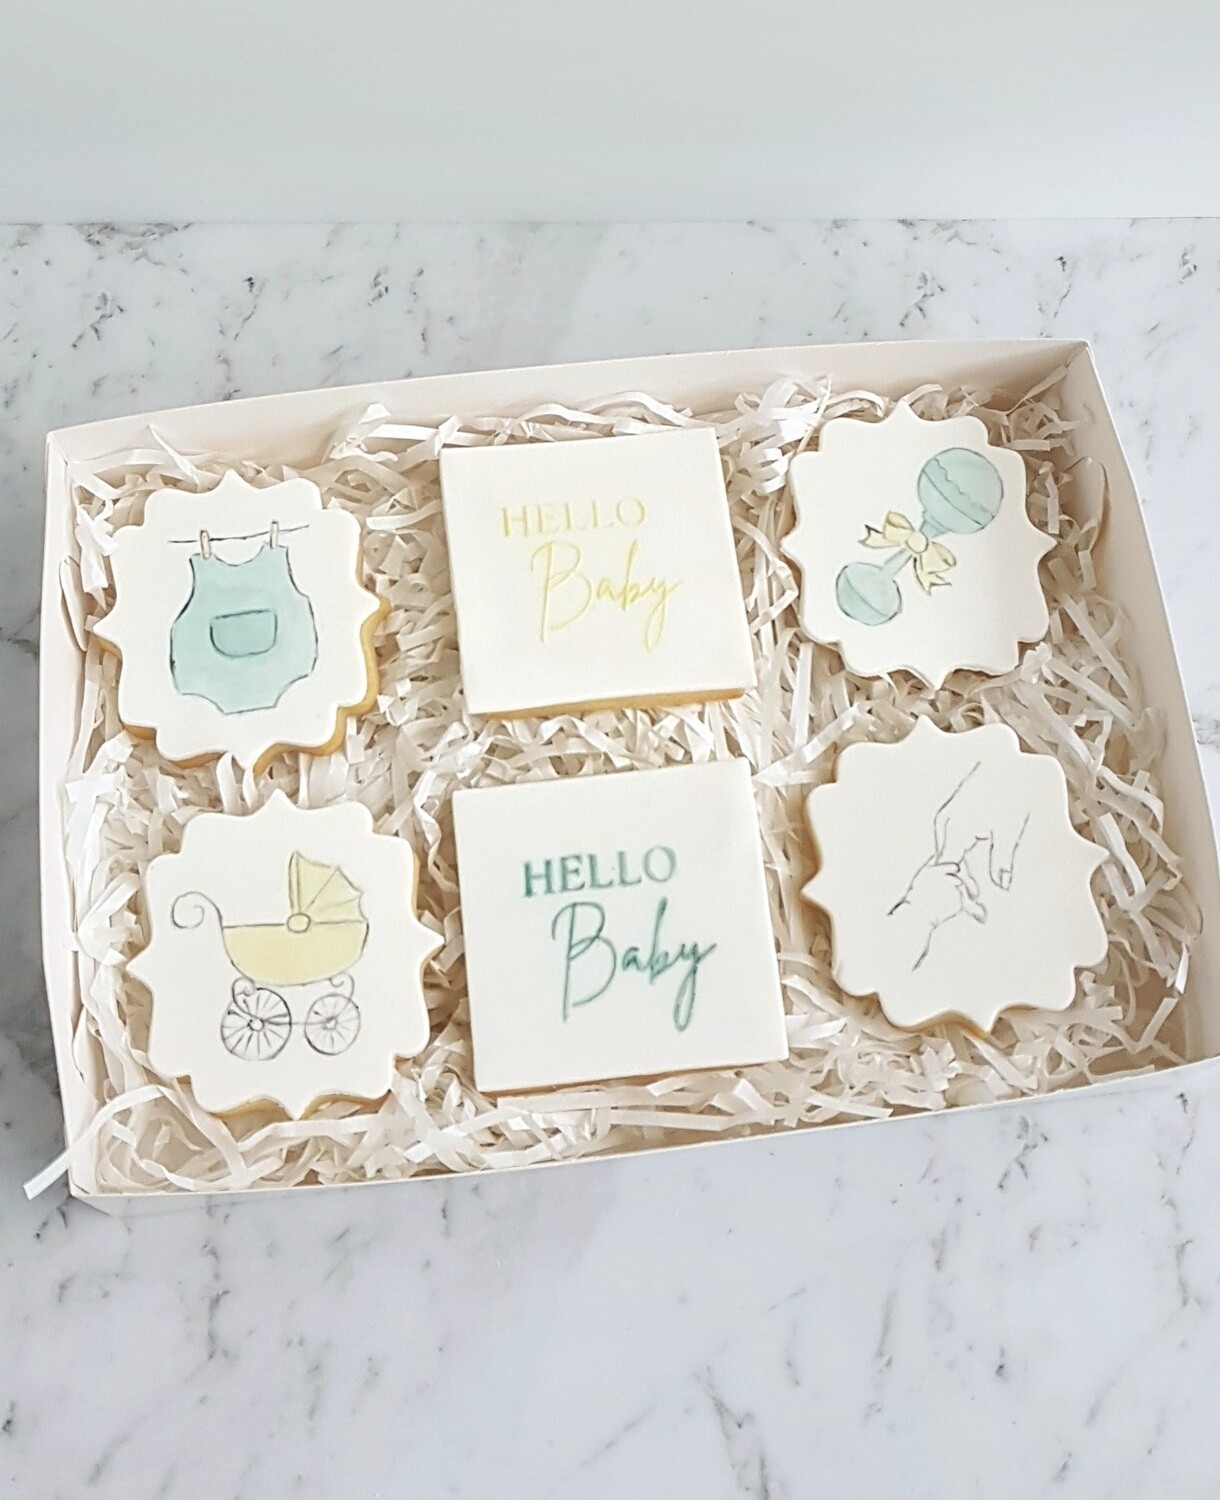 Welcome Baby set